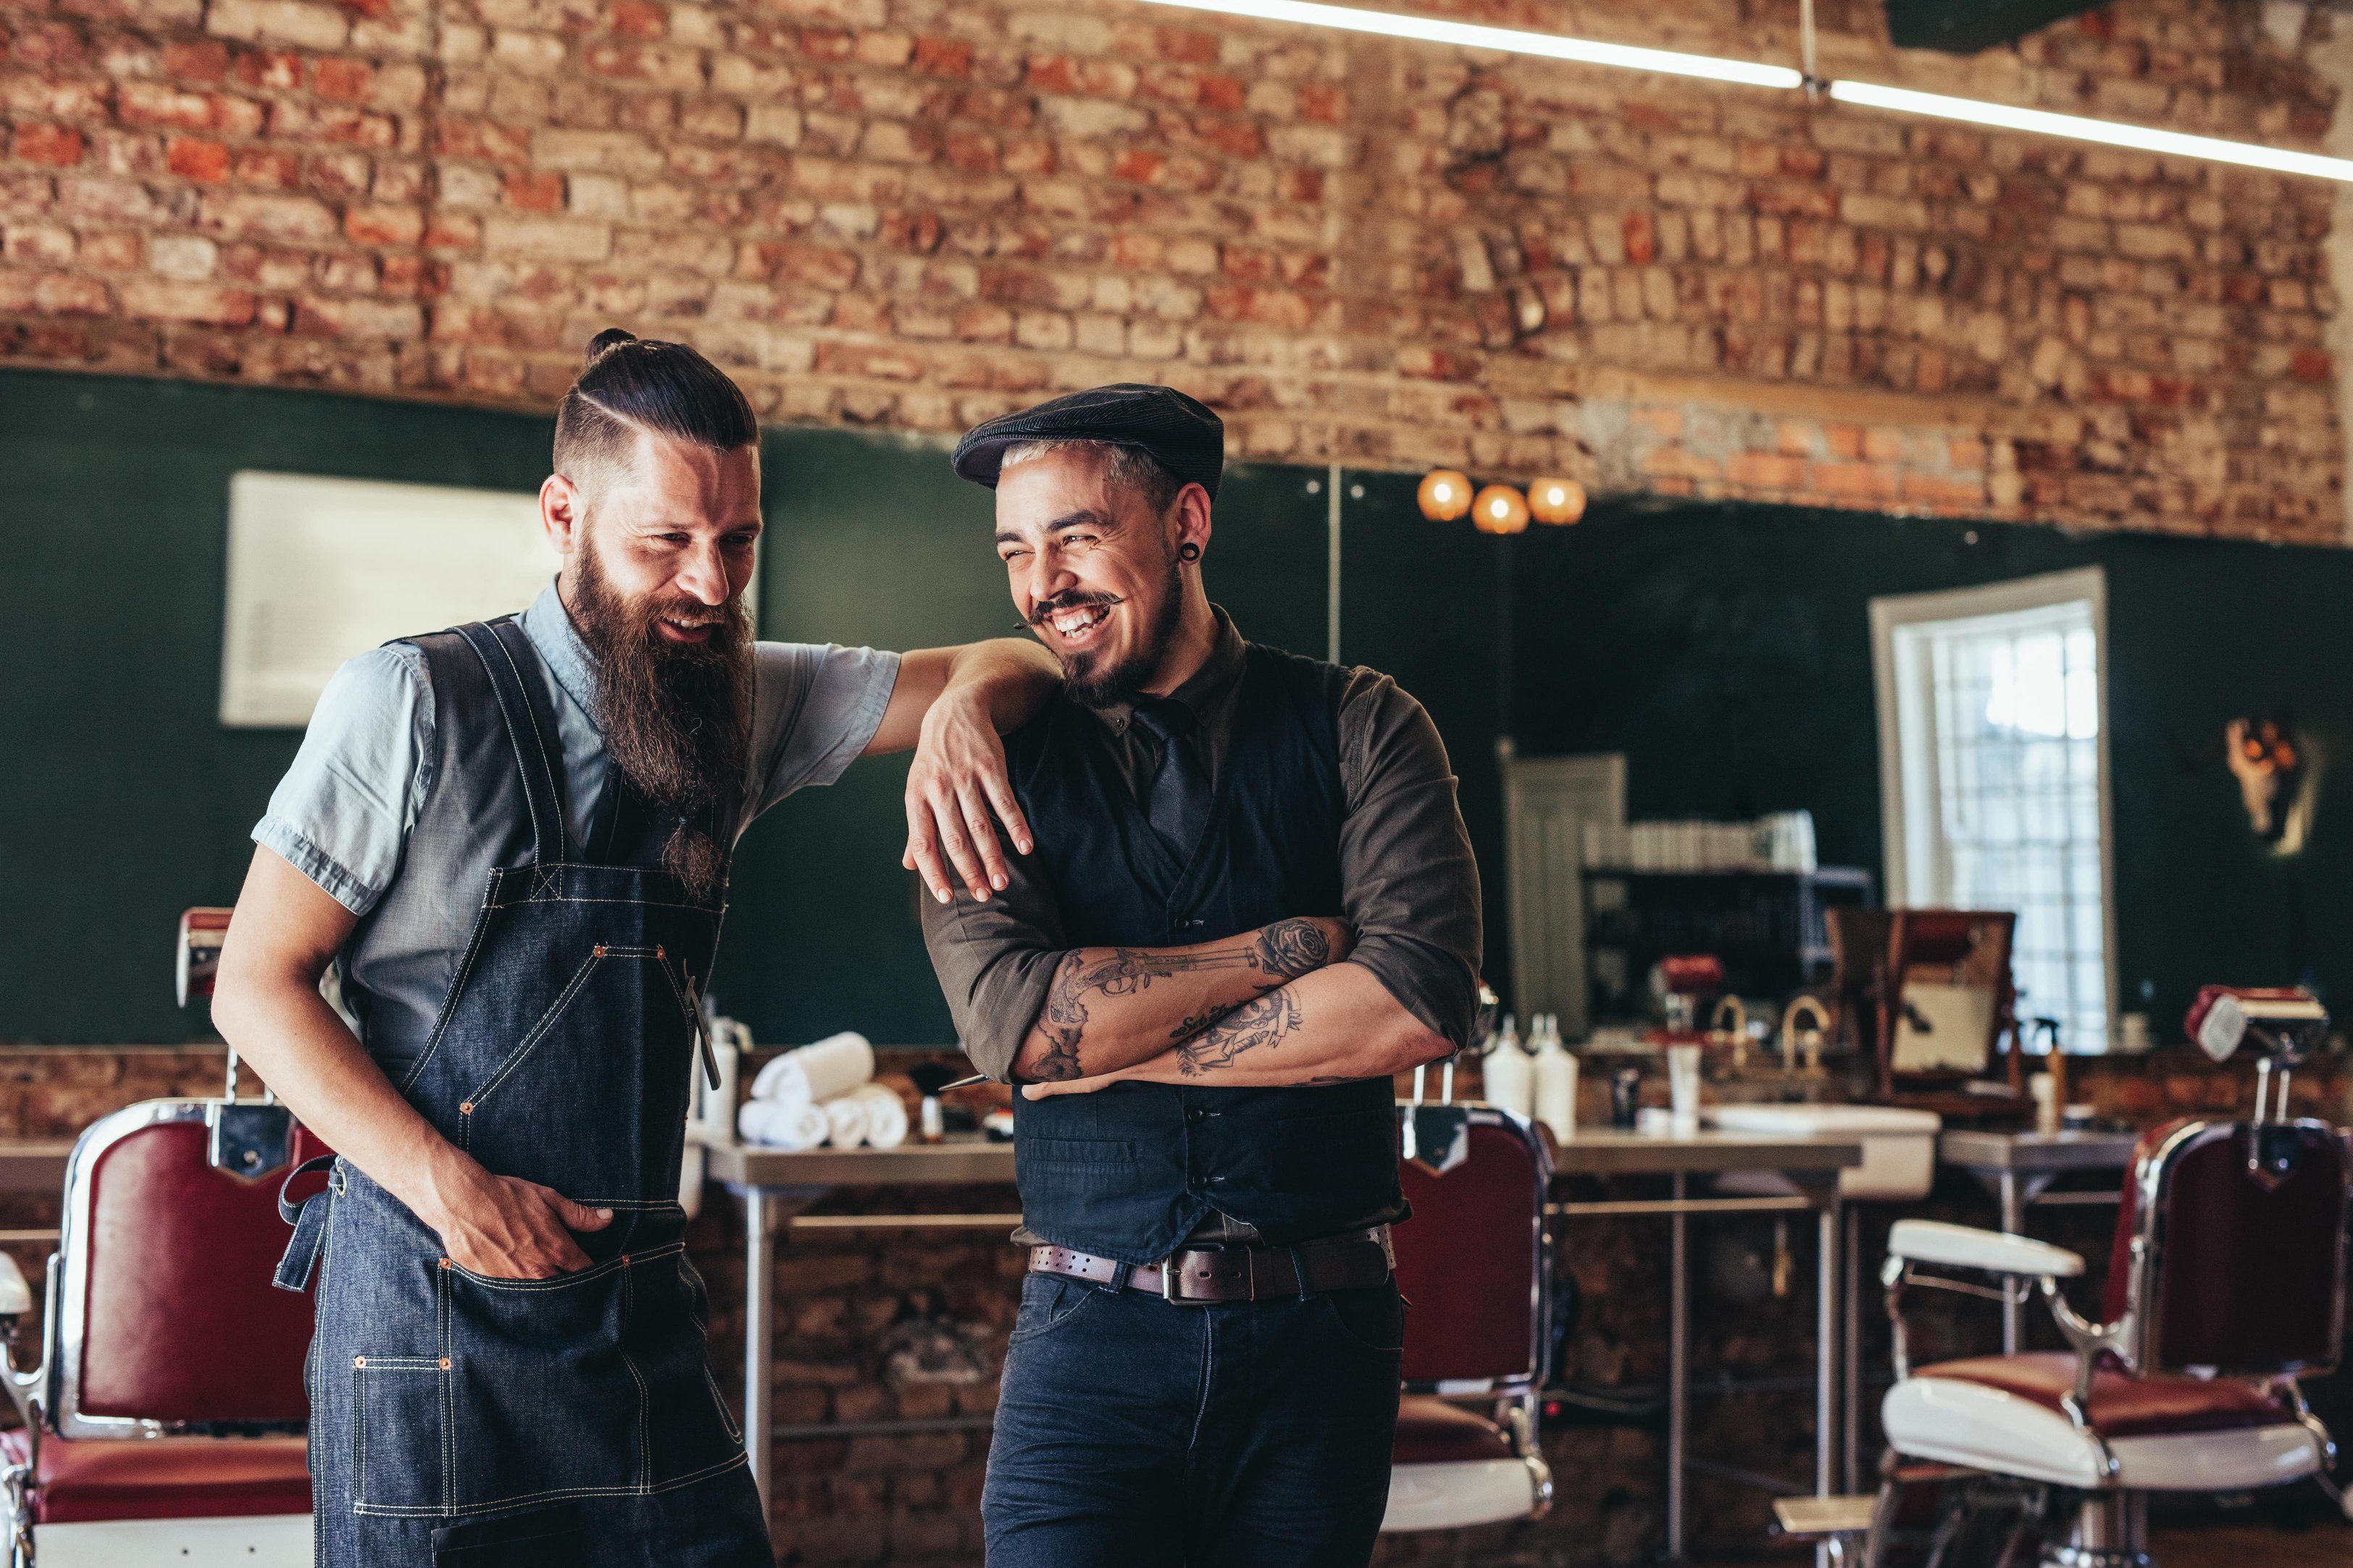 The Case For Why Barbers Should Focus on Keeping Current Customers